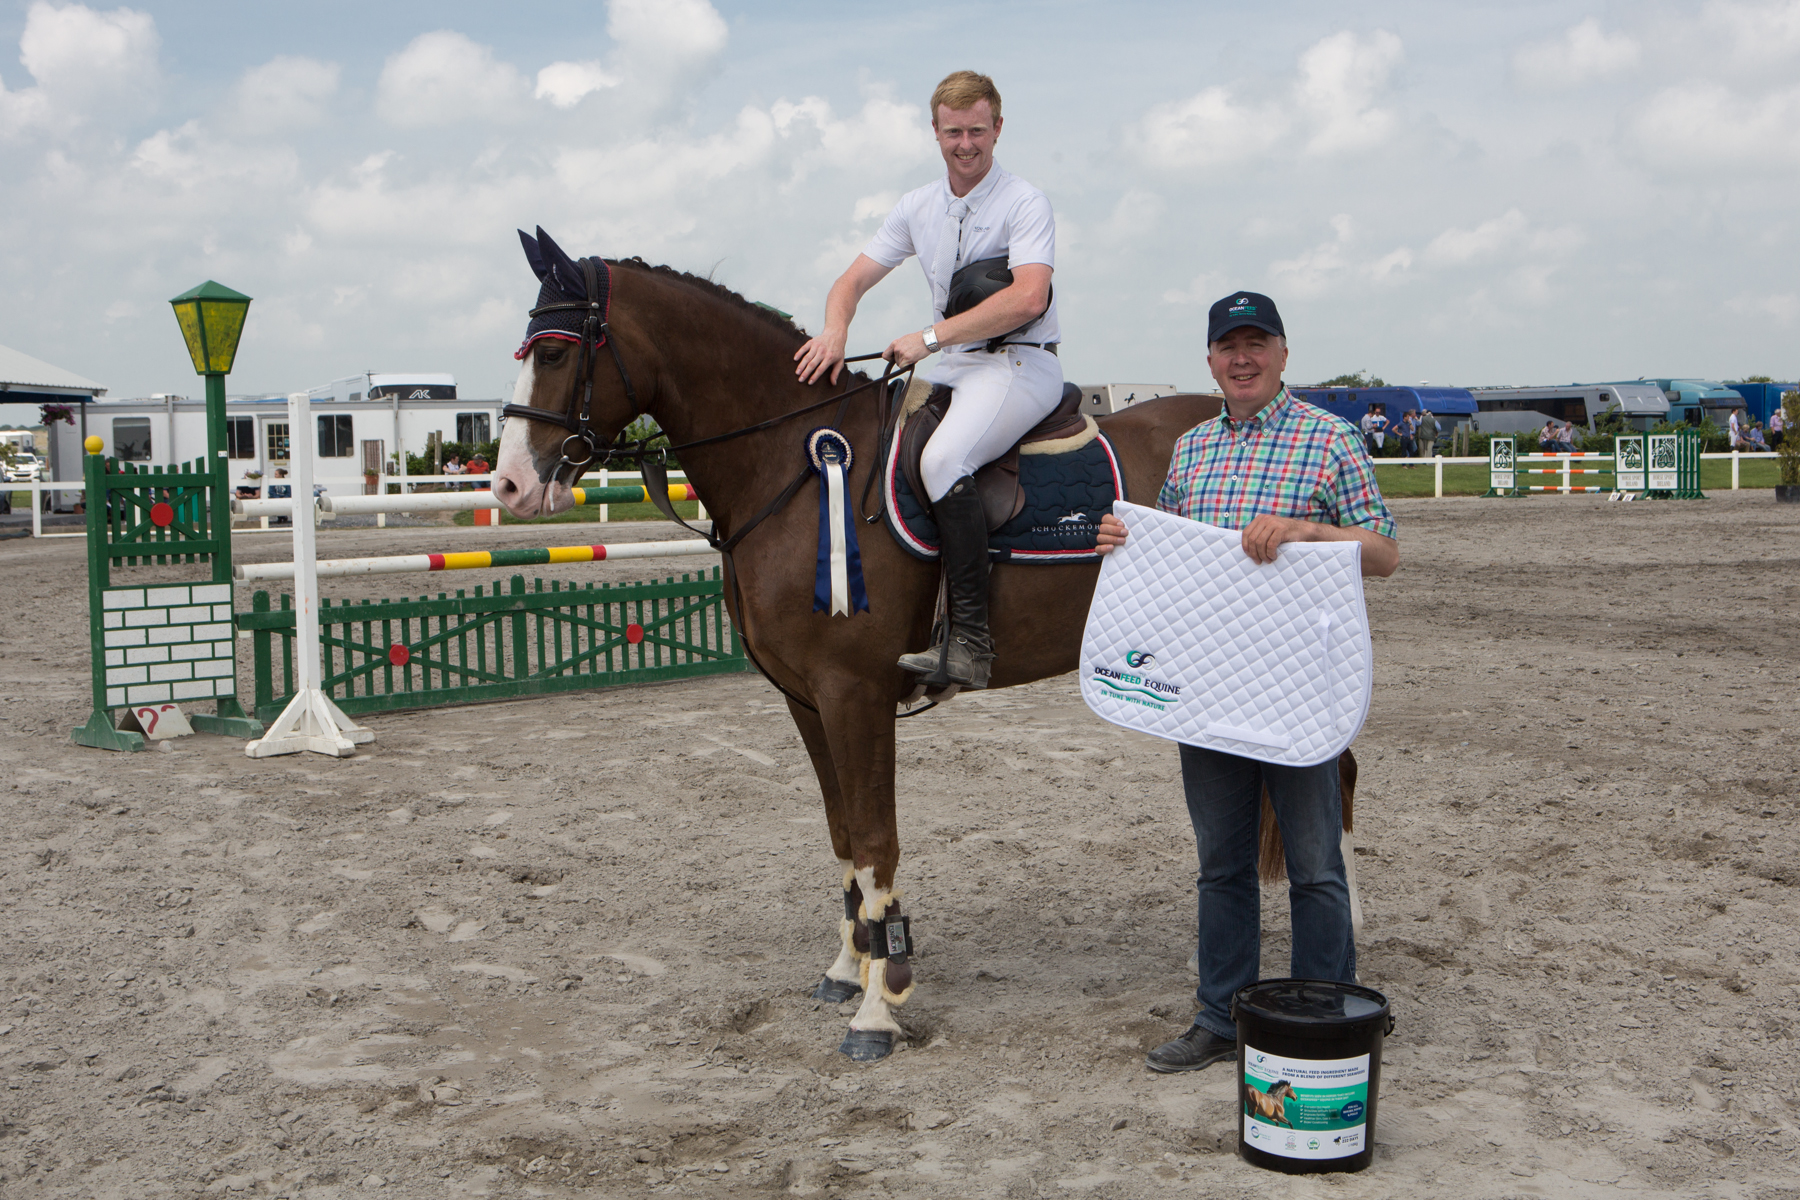 Pictured at the RDS Qualifiers at Galway Equestrian Centre sponsored locally by OceanFeed Equine are Niall Mullins on Tink Again, owned by Niall who came 1st in the 5 Year Old Class and Gerry Warren, Sales Manager, OceanFeed Equine. Photo Martina Regan